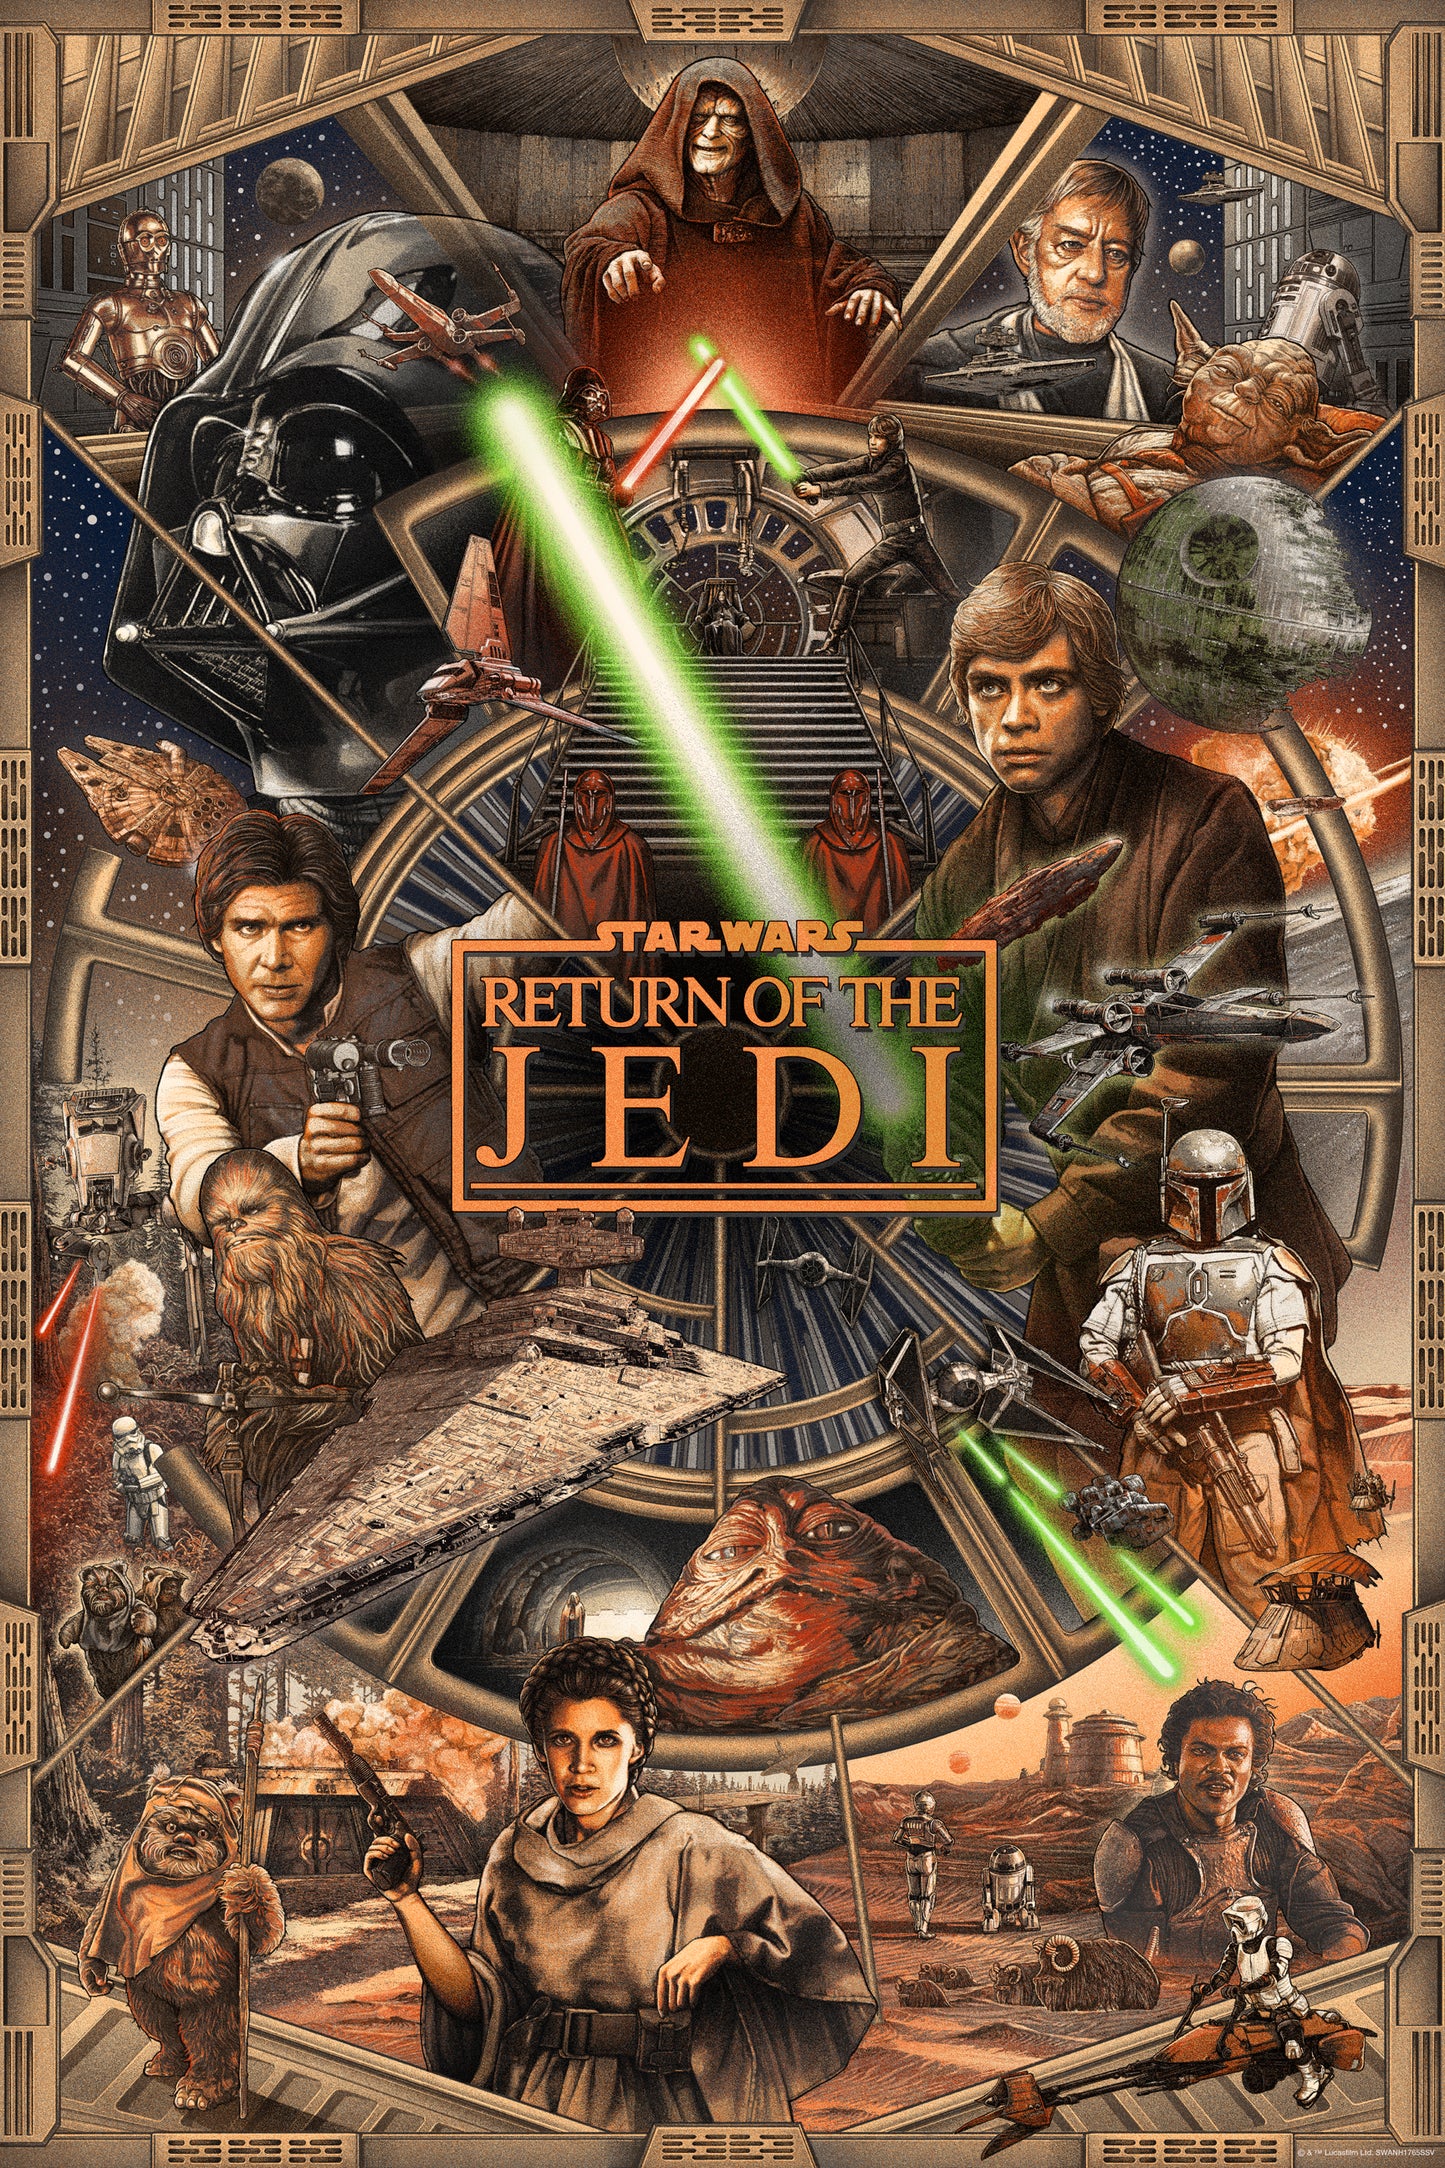 Ise Ananphada "Return of the Jedi (End of an Era)" Variant